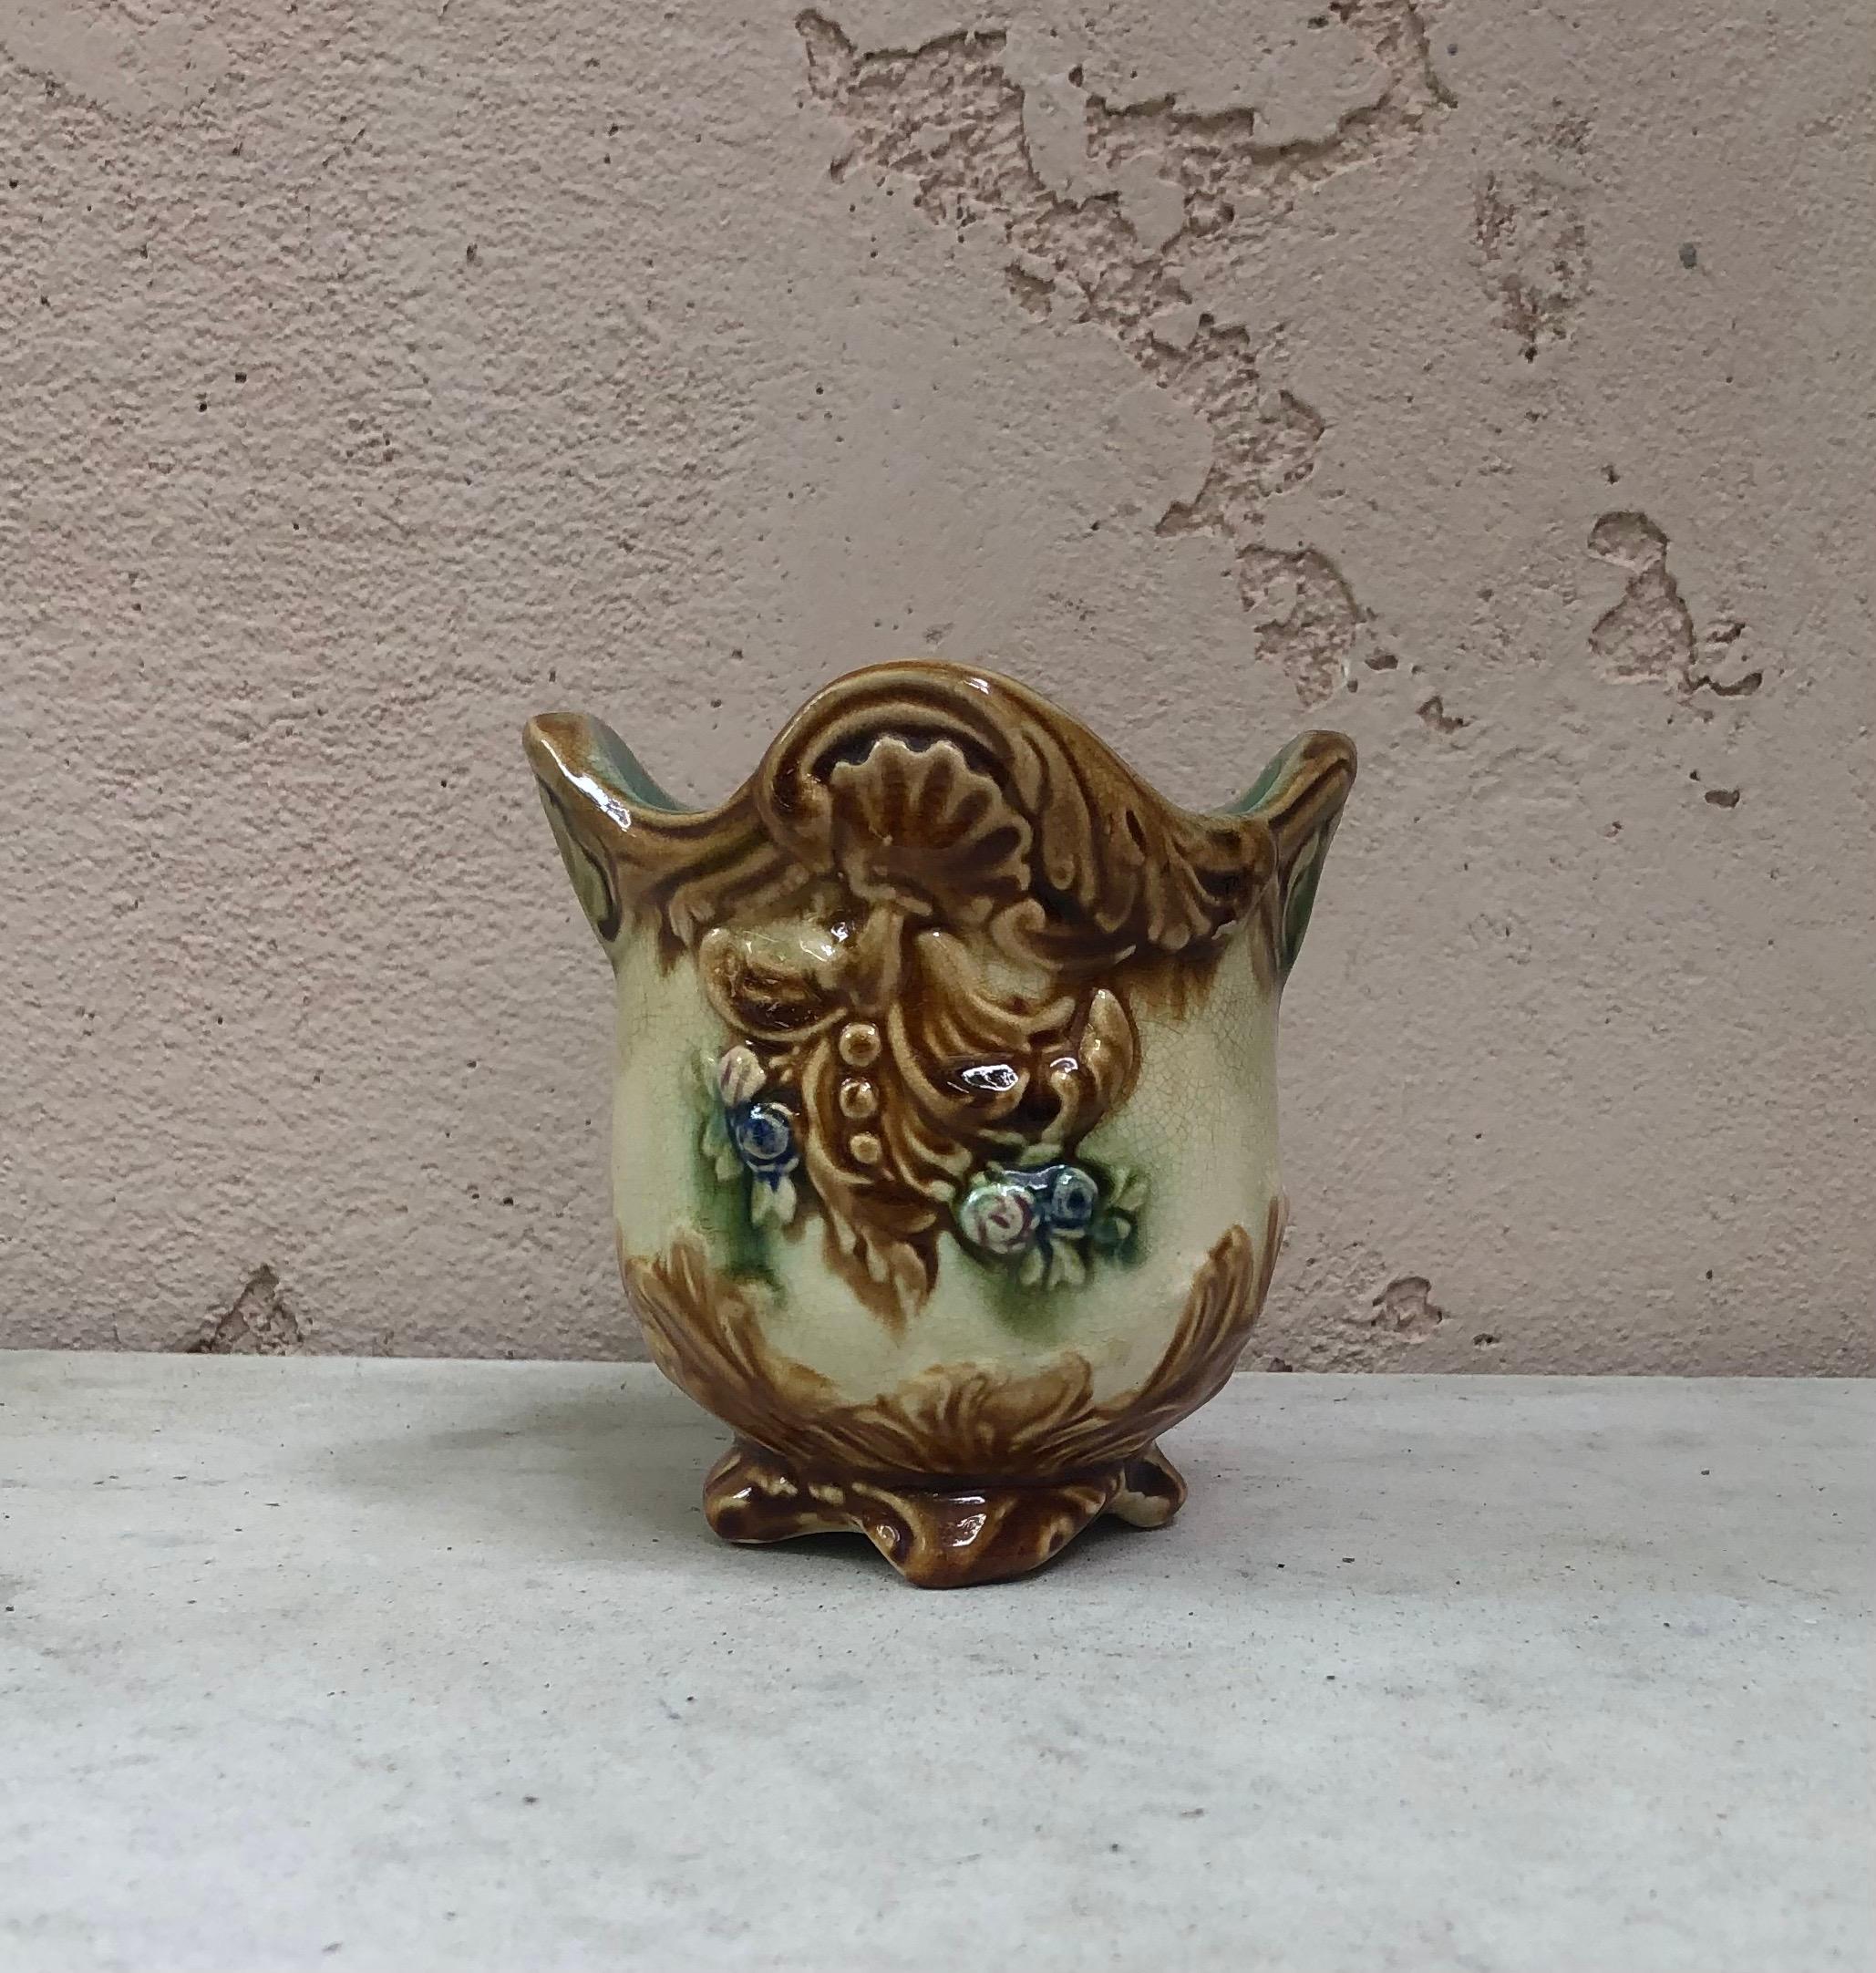 Small French Majolica cache pot Onnaing Circa 1890.
Decorated with a medallion and flowers.